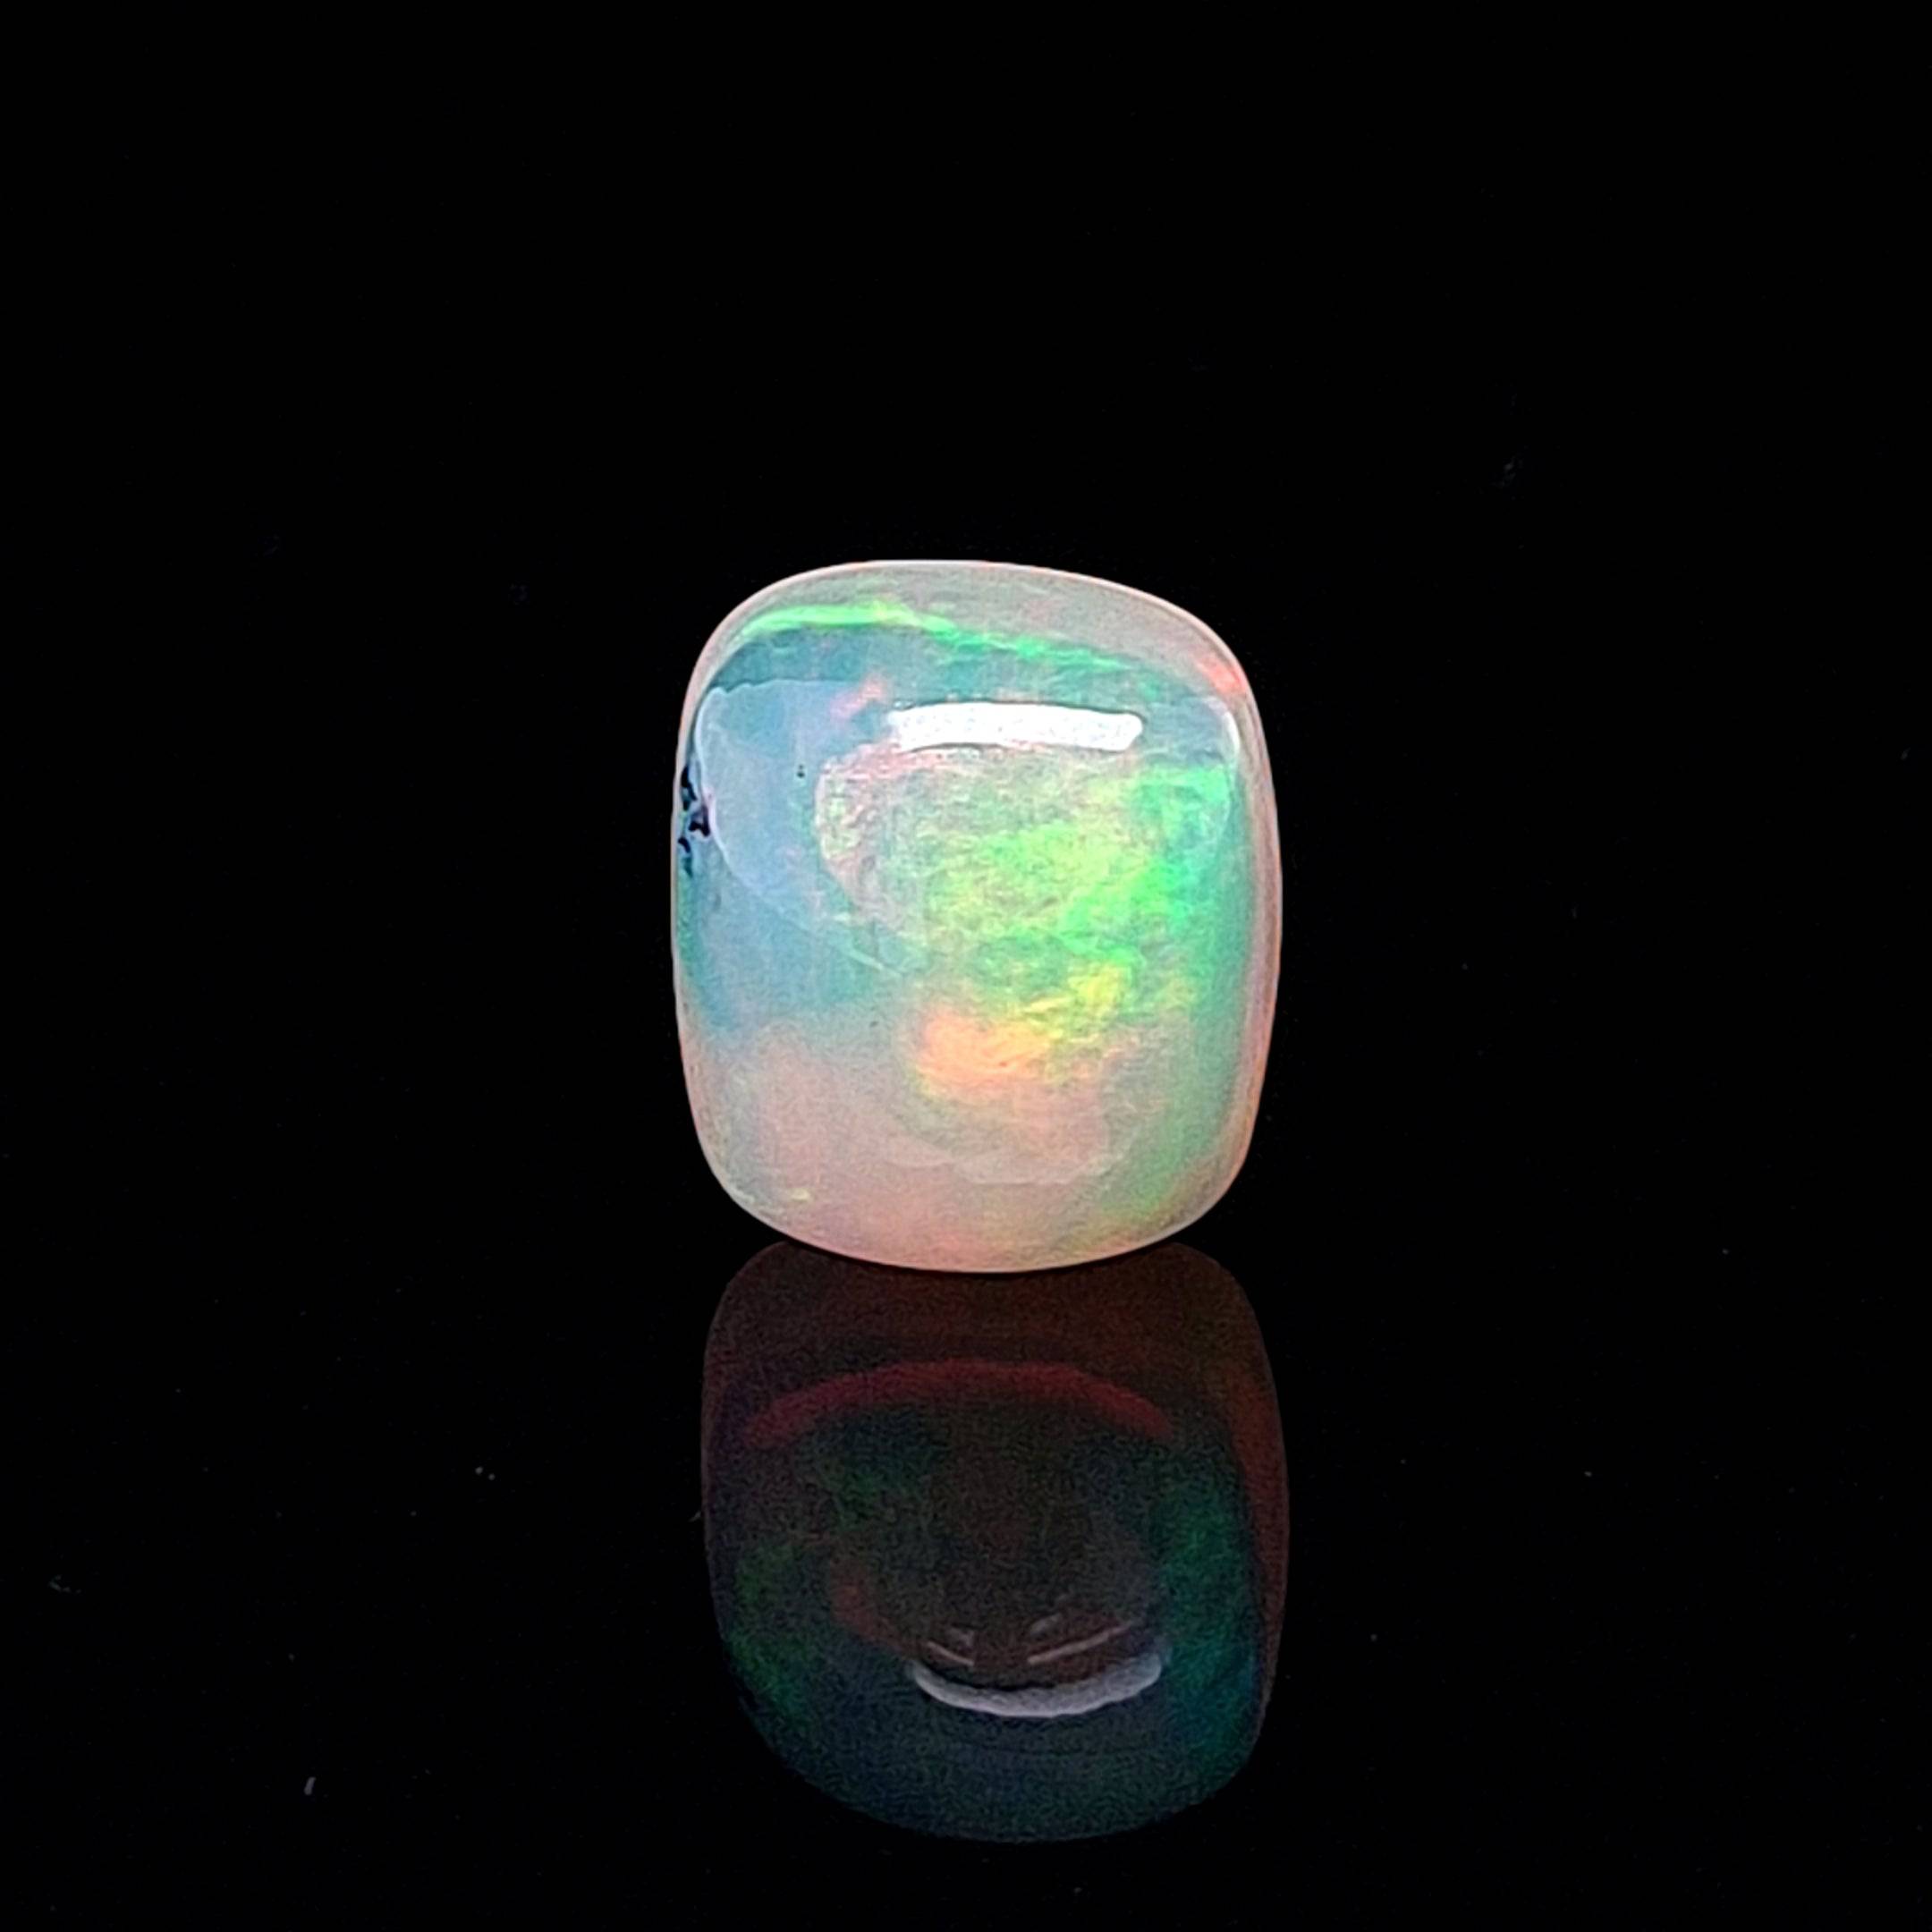 Natural Opal Cabochon 11x10mm | 3.60cts | Ethiopian Mined Untreated - The LabradoriteKing